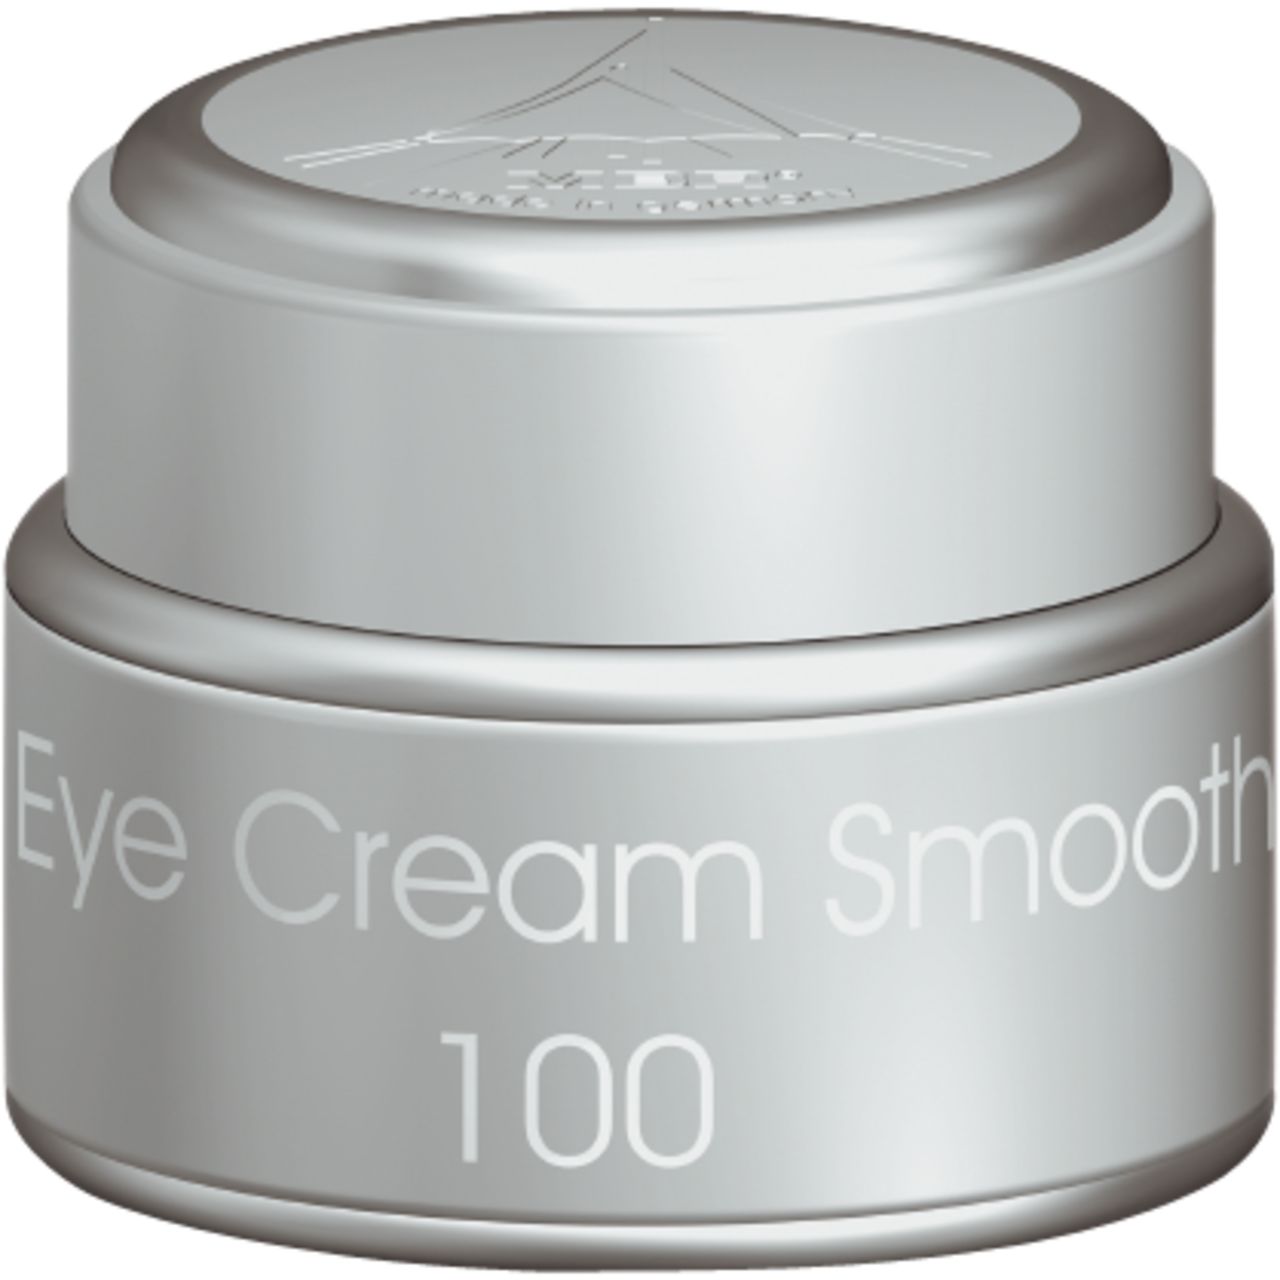 Mbr, Pure Perfection 100 N Eye Cream Smooth 100